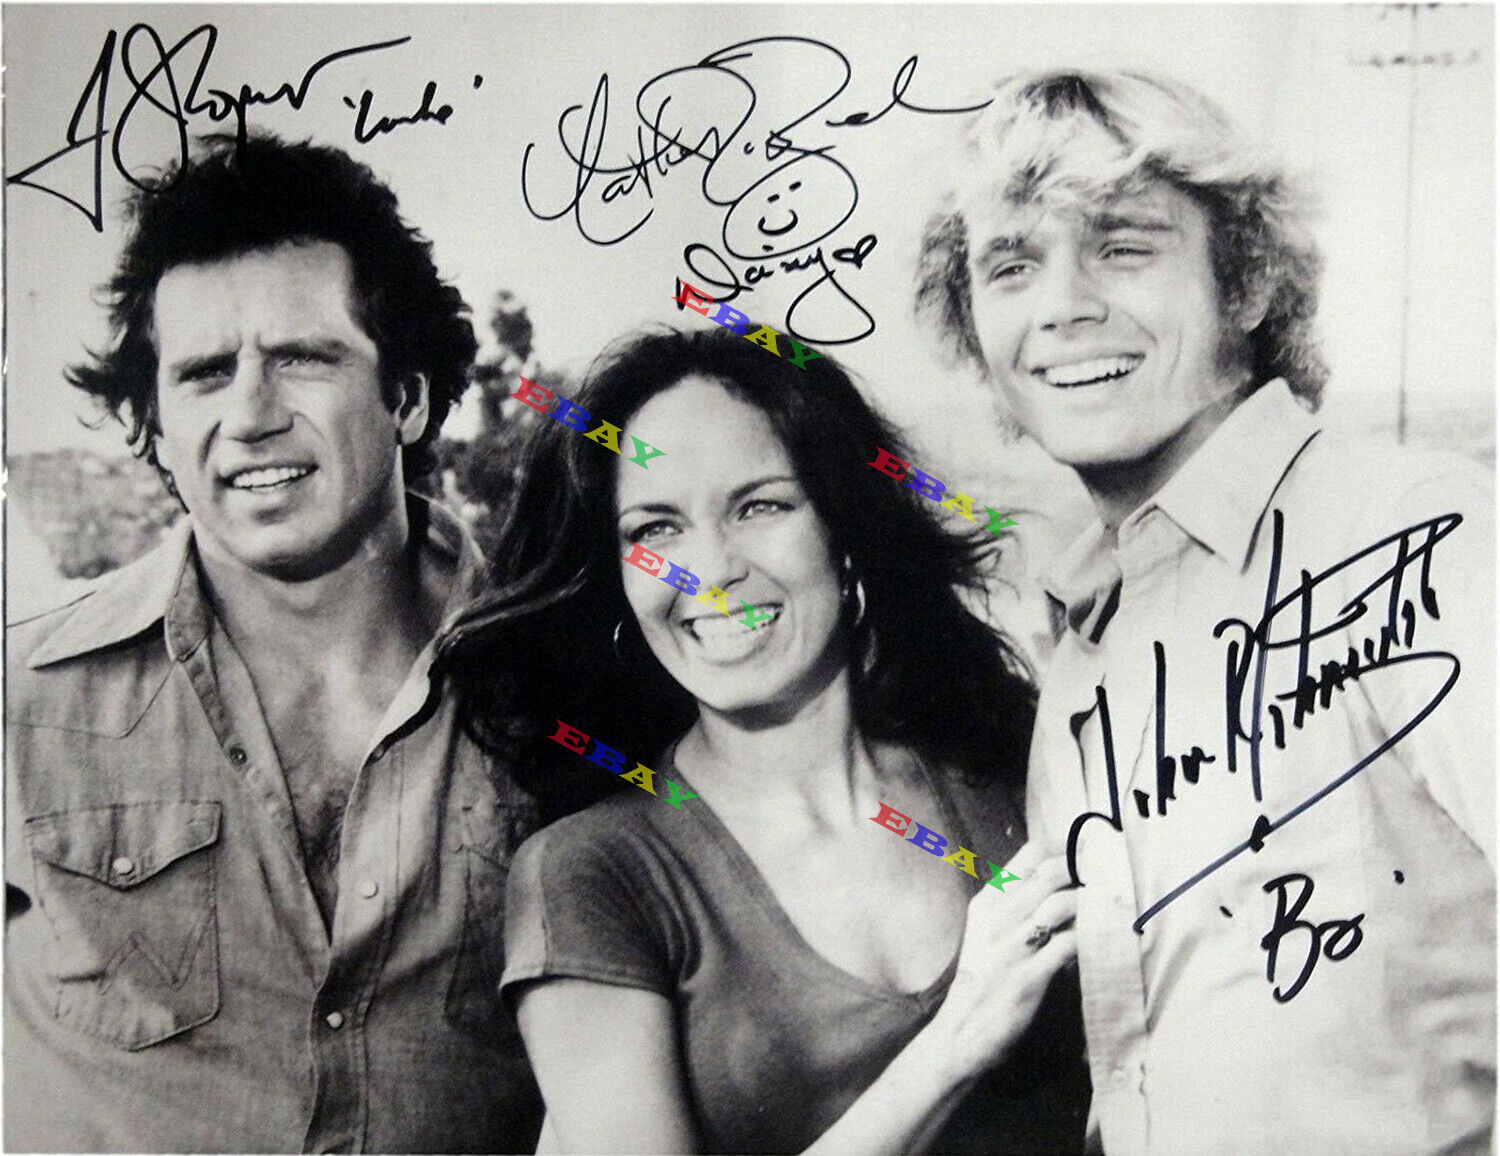 Wopat Schneider Bach Cast Dukes Of Hazard Autographed Signed Photo Poster painting Reprint